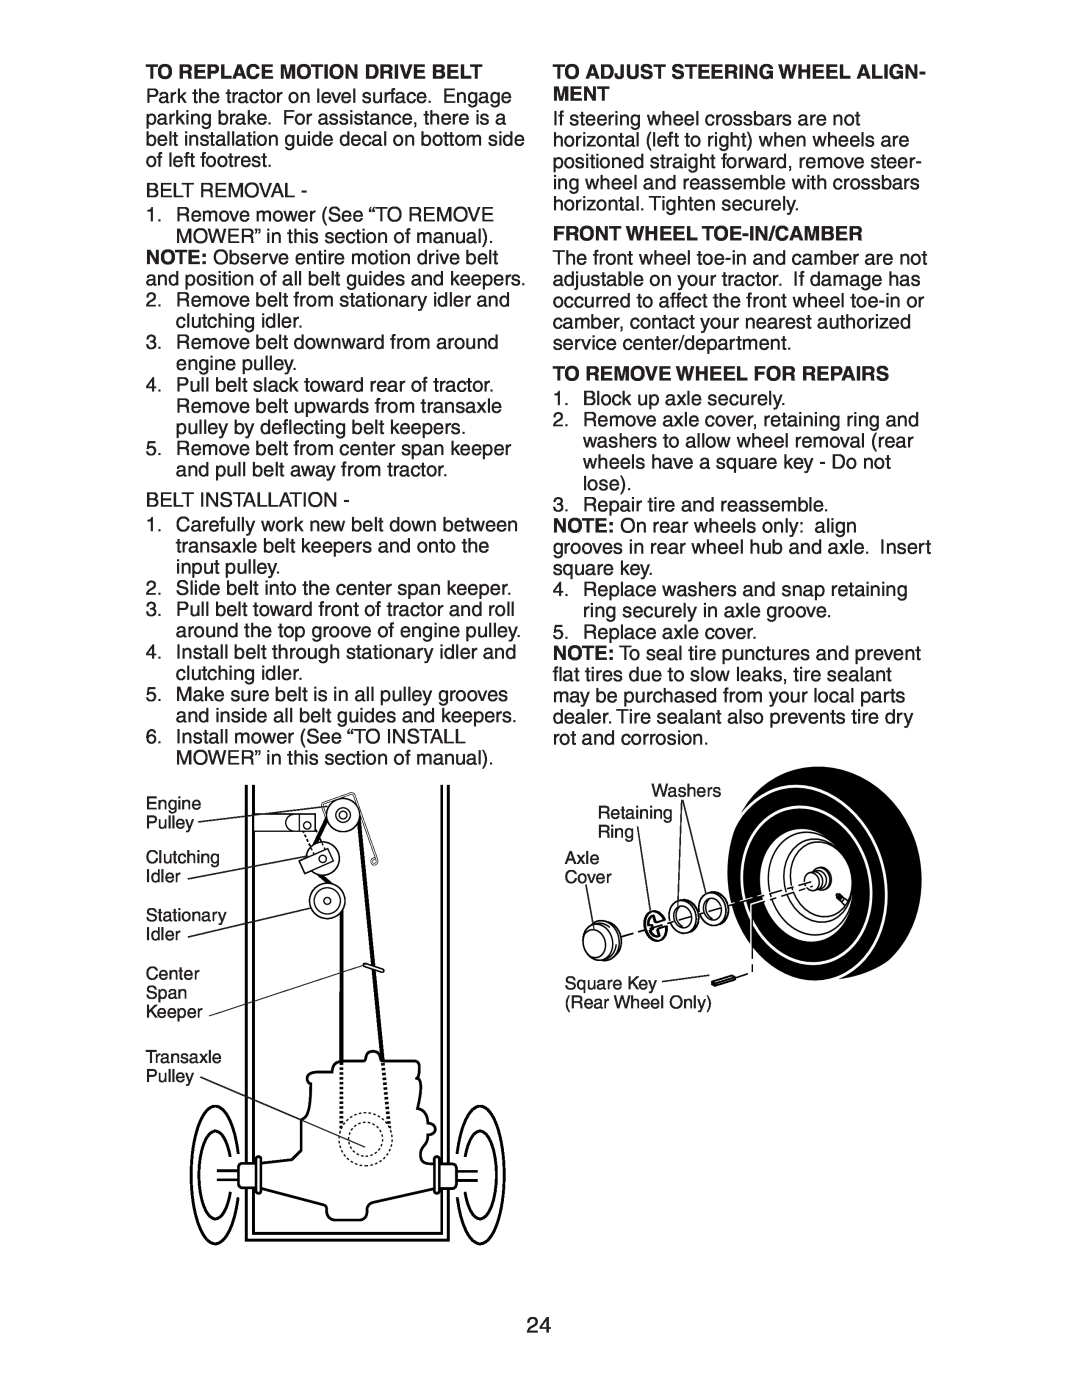 Electrolux AG15538B manual To Replace Motion Drive Belt, To Adjust Steering Wheel Align- Ment, Front Wheel Toe-In/Camber 